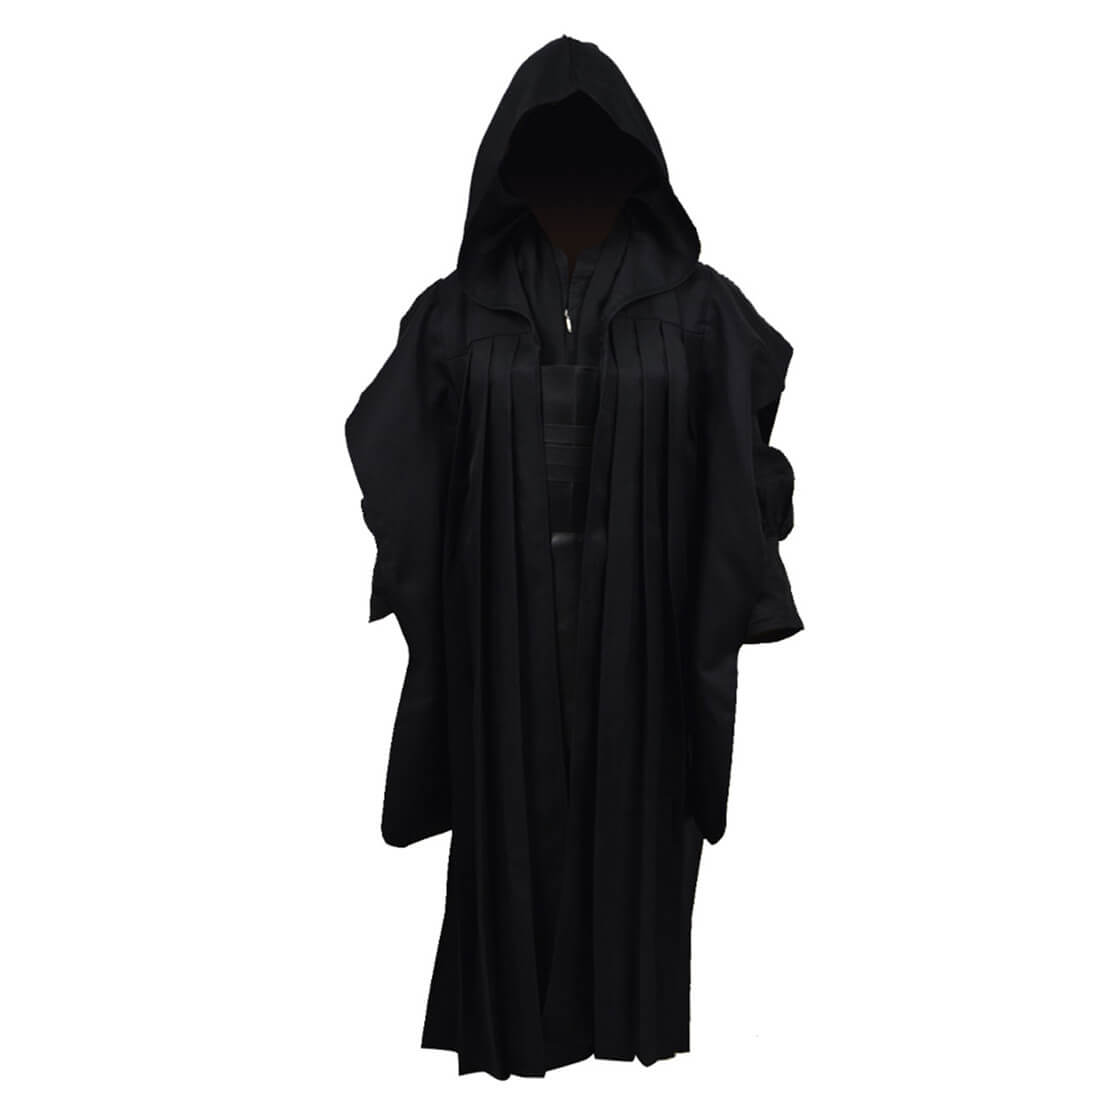 Kids Star Wars Costumes Children Tunic Robes Outfit Hooded Cloak for Halloween Party